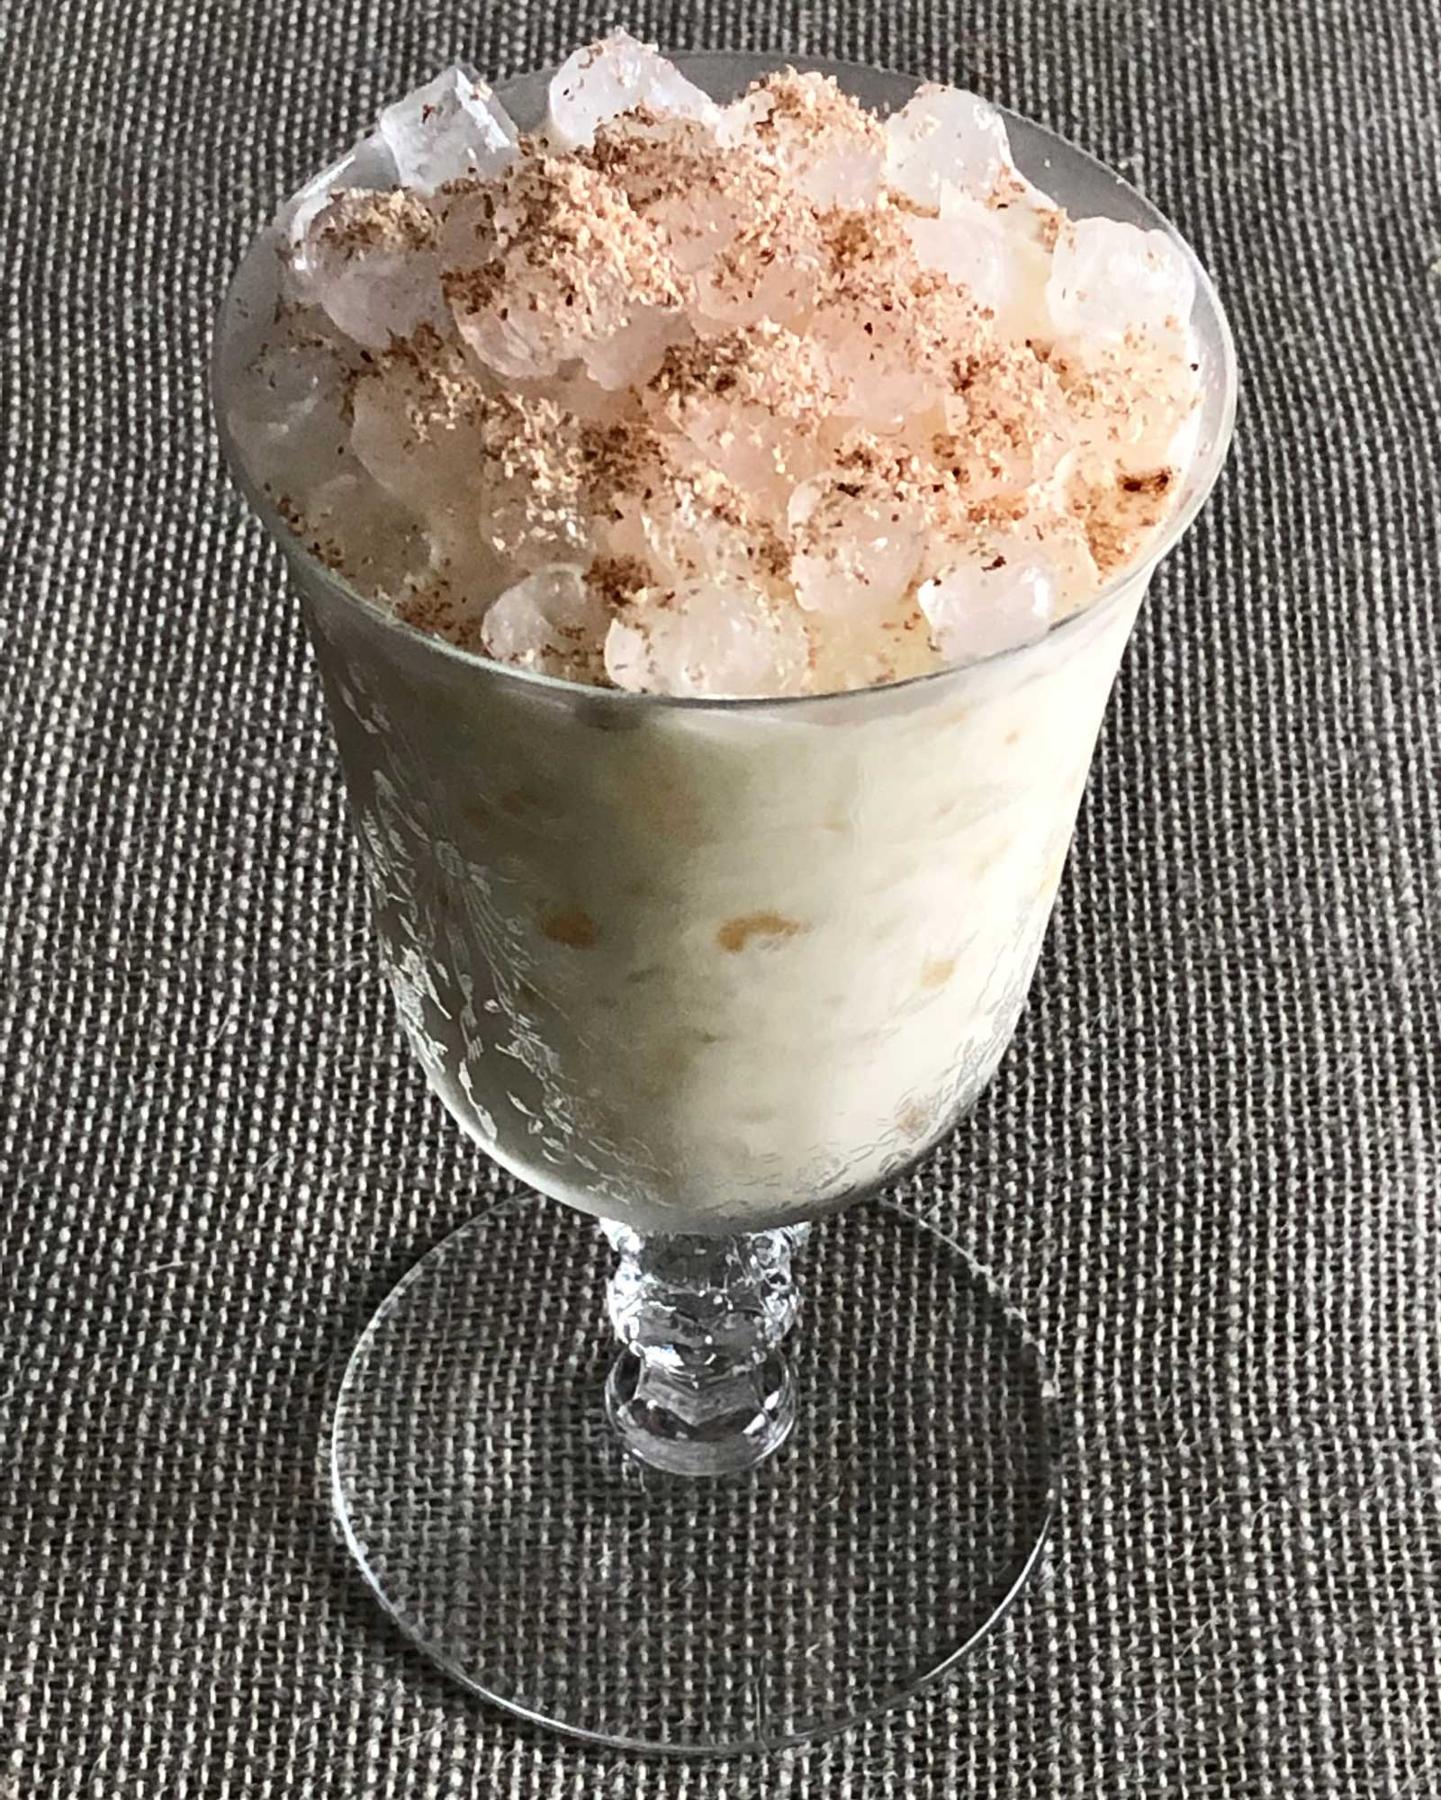 An example of the Caribbean Milk Punch, the mixed drink (drink), by Brennan’s Restaurant, New Orleans, Louisiana, featuring Smith & Cross Traditional Jamaica Rum, vanilla syrup, cream, bourbon whiskey, and grated nutmeg; photo by Lee Edwards